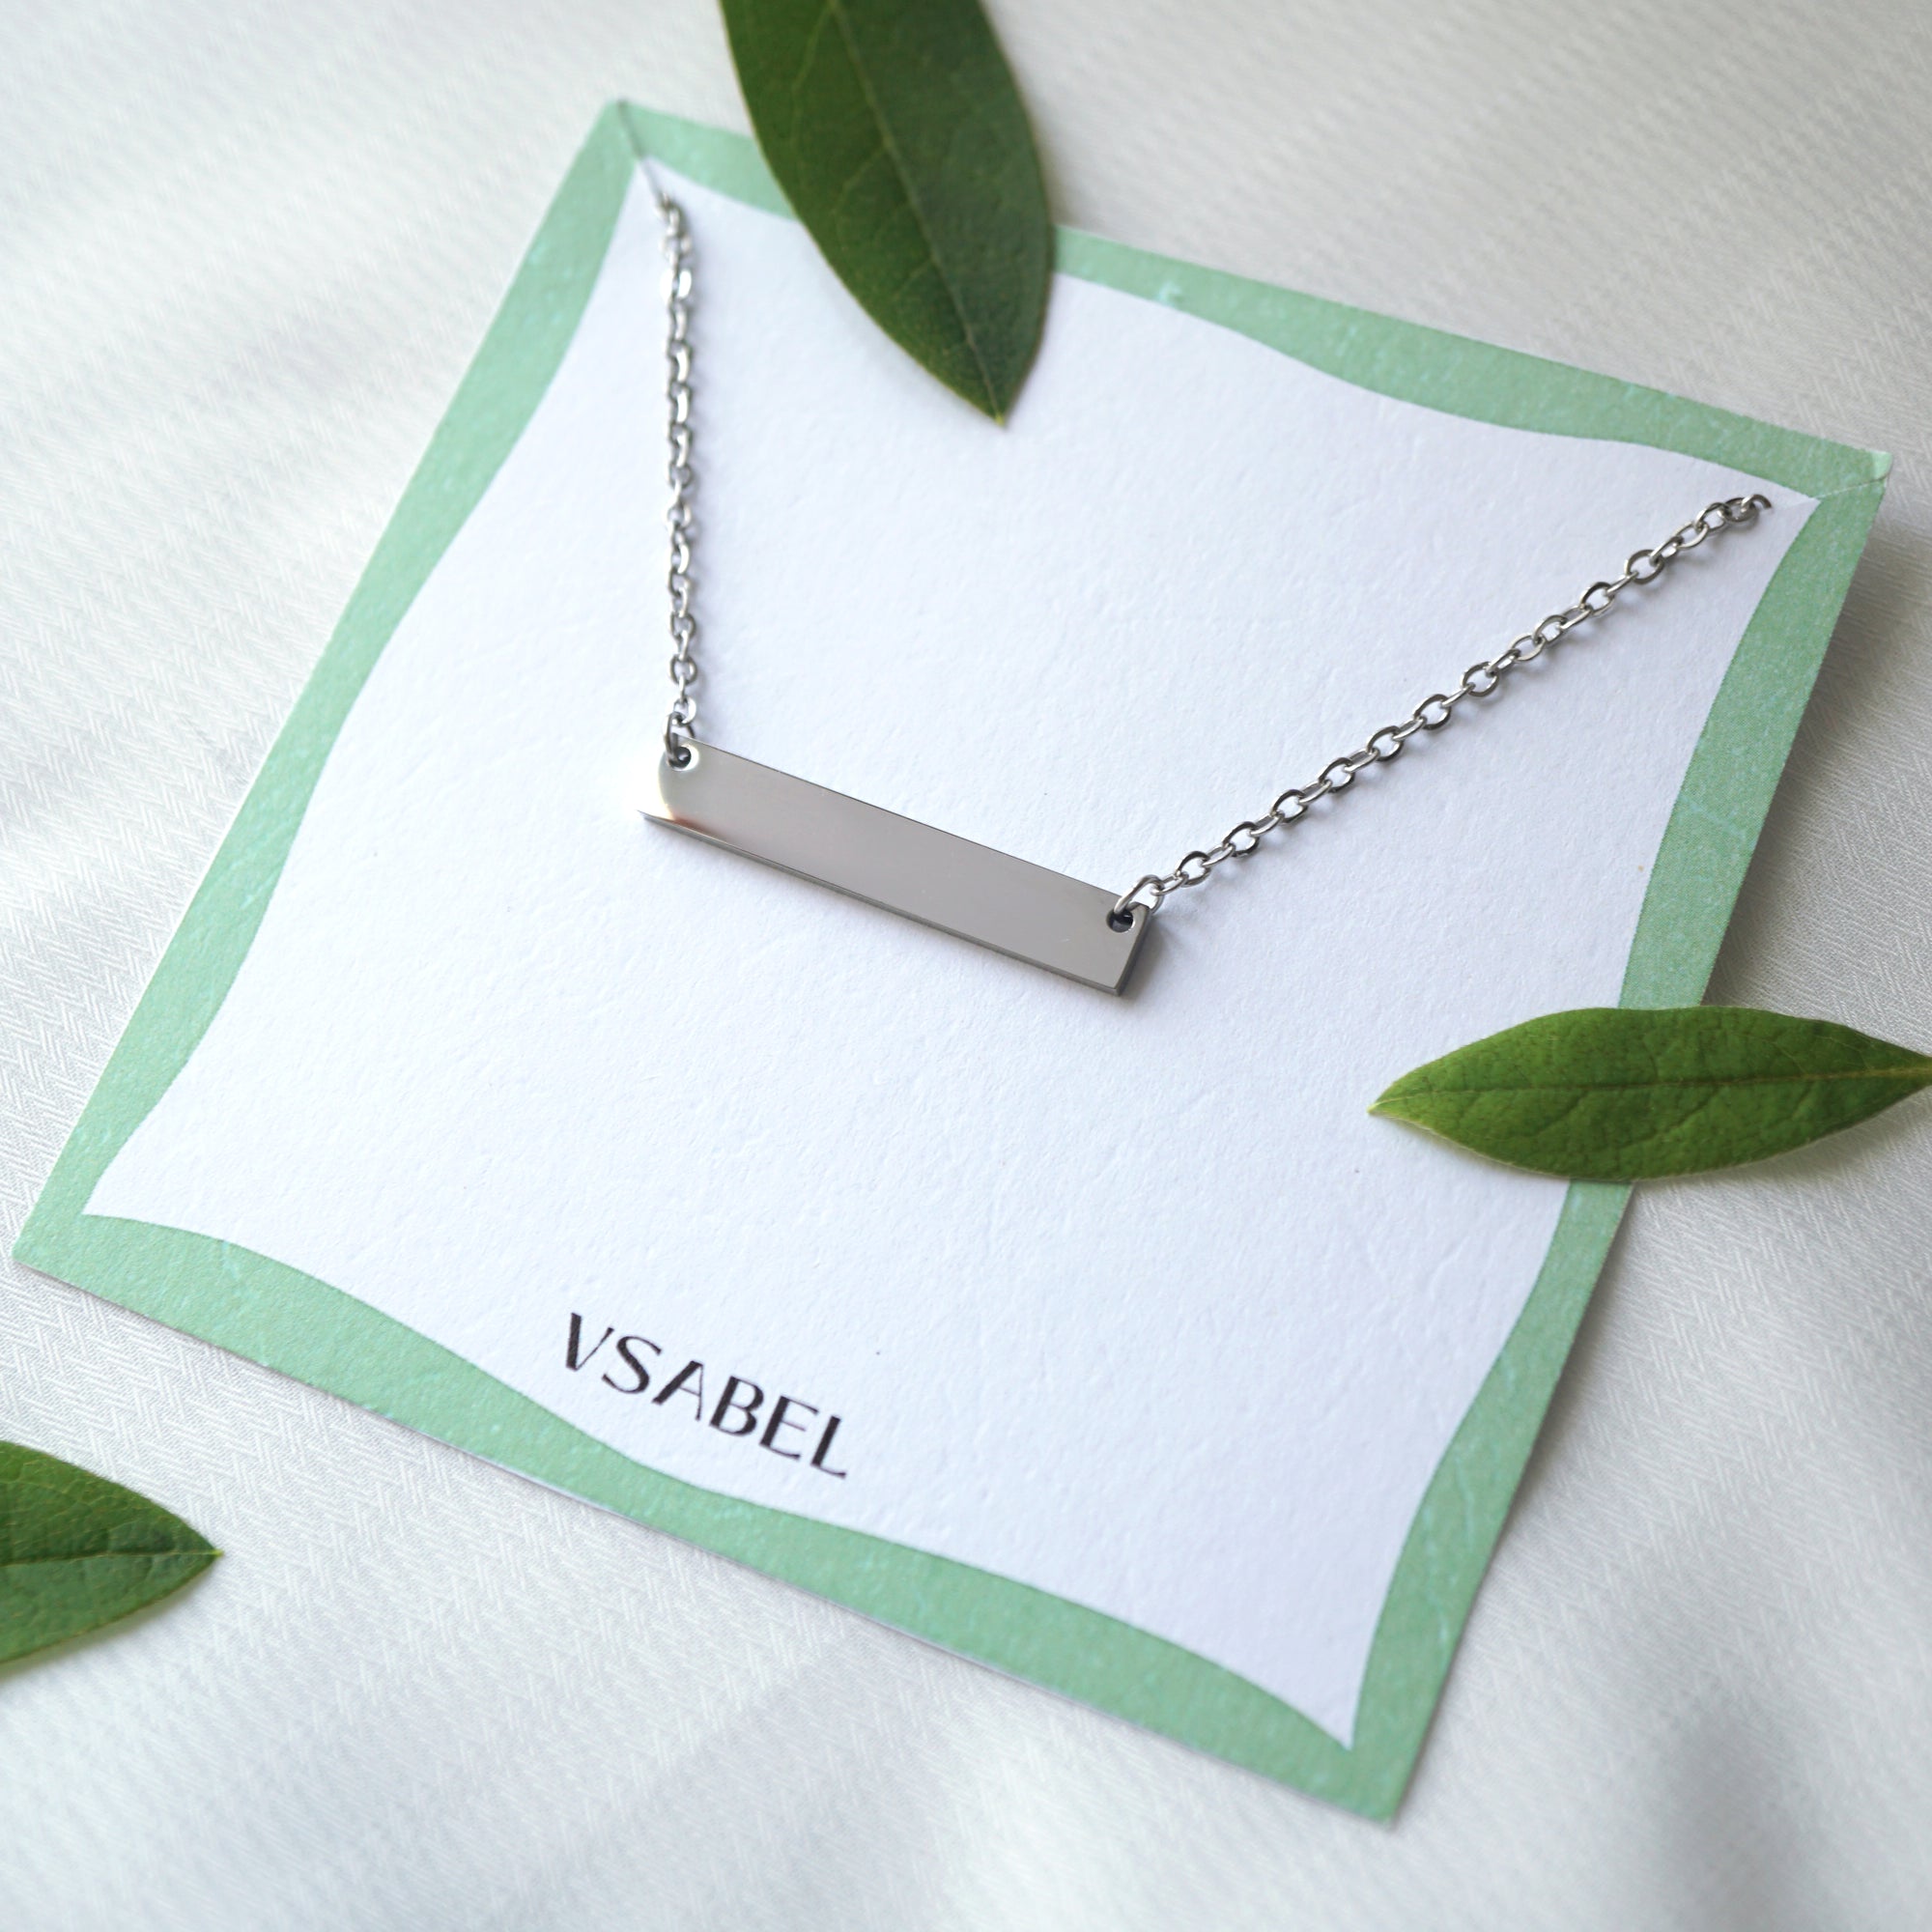 Custom Name Bar Necklace, Personalized Engraved Necklace, Unique Name Necklace, Anniversary Date Necklace, Thoughtful Gift, Bridesmaid gift